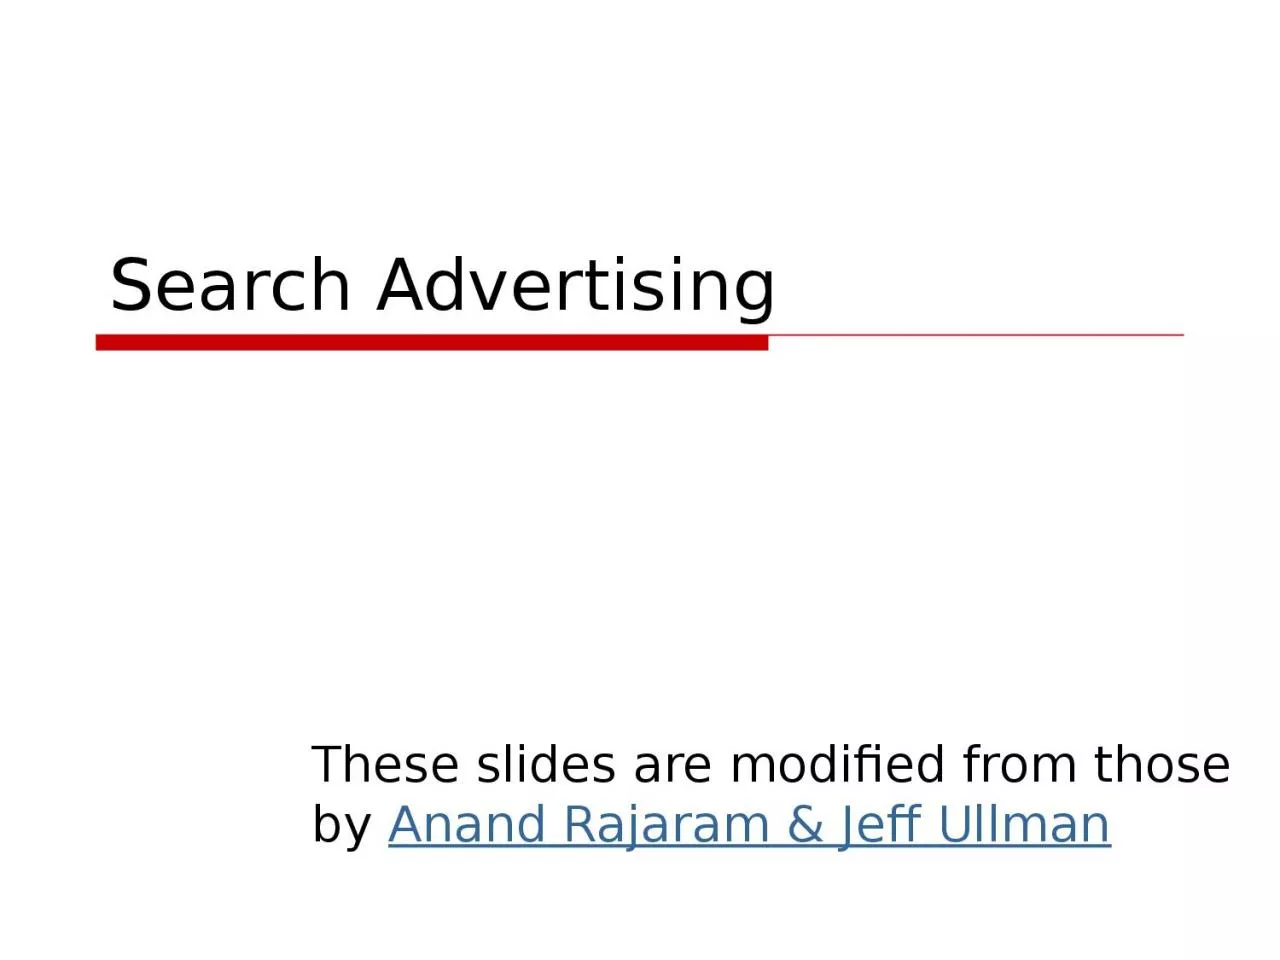 Search Advertising These slides are modified from those by